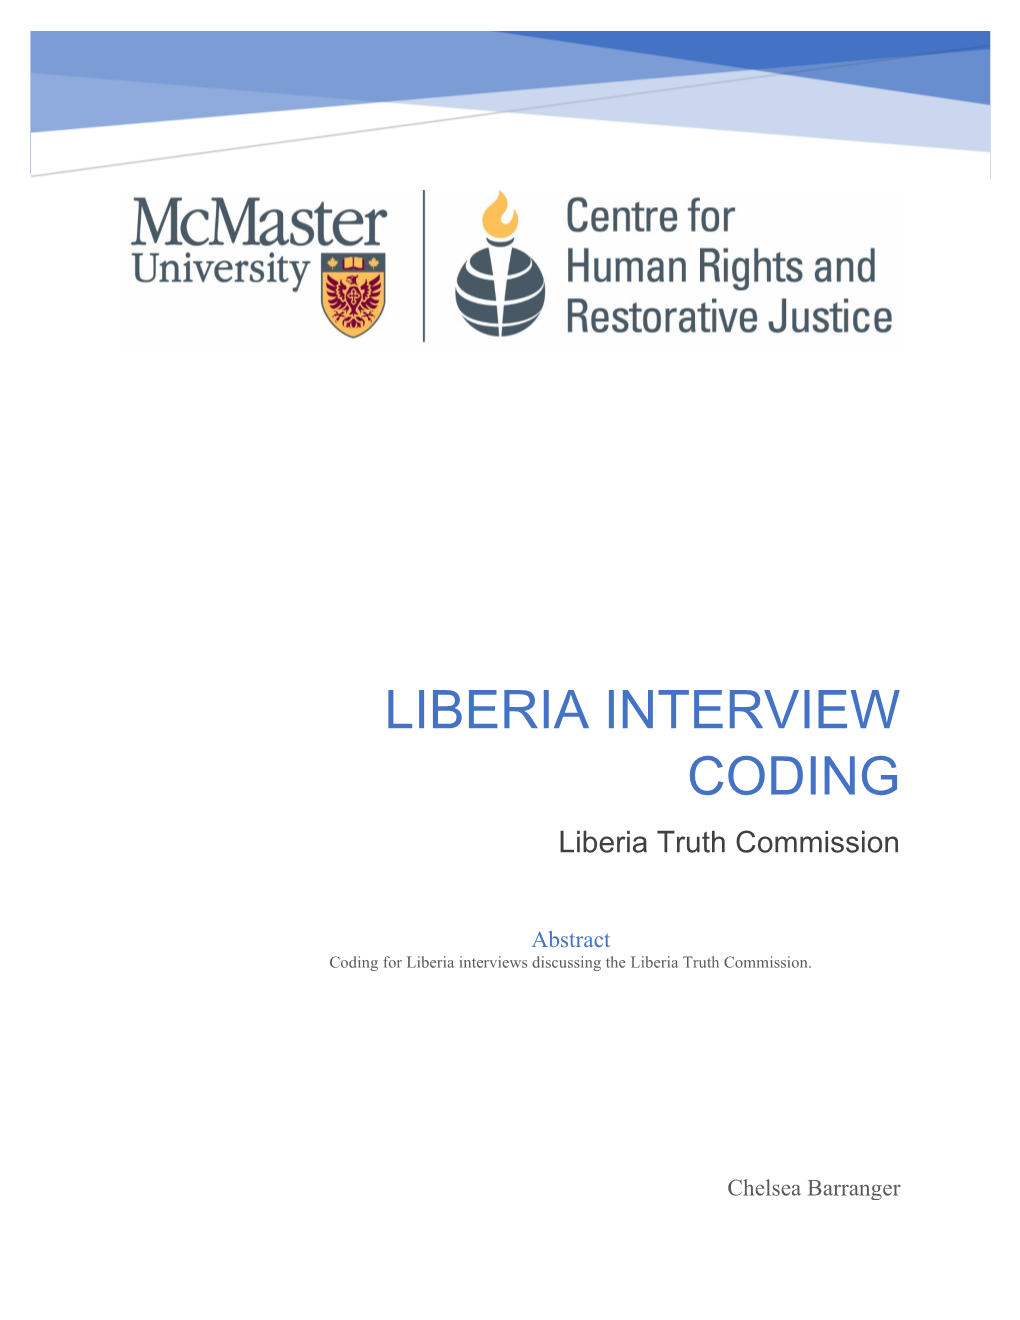 Coding for the Liberia Interviews